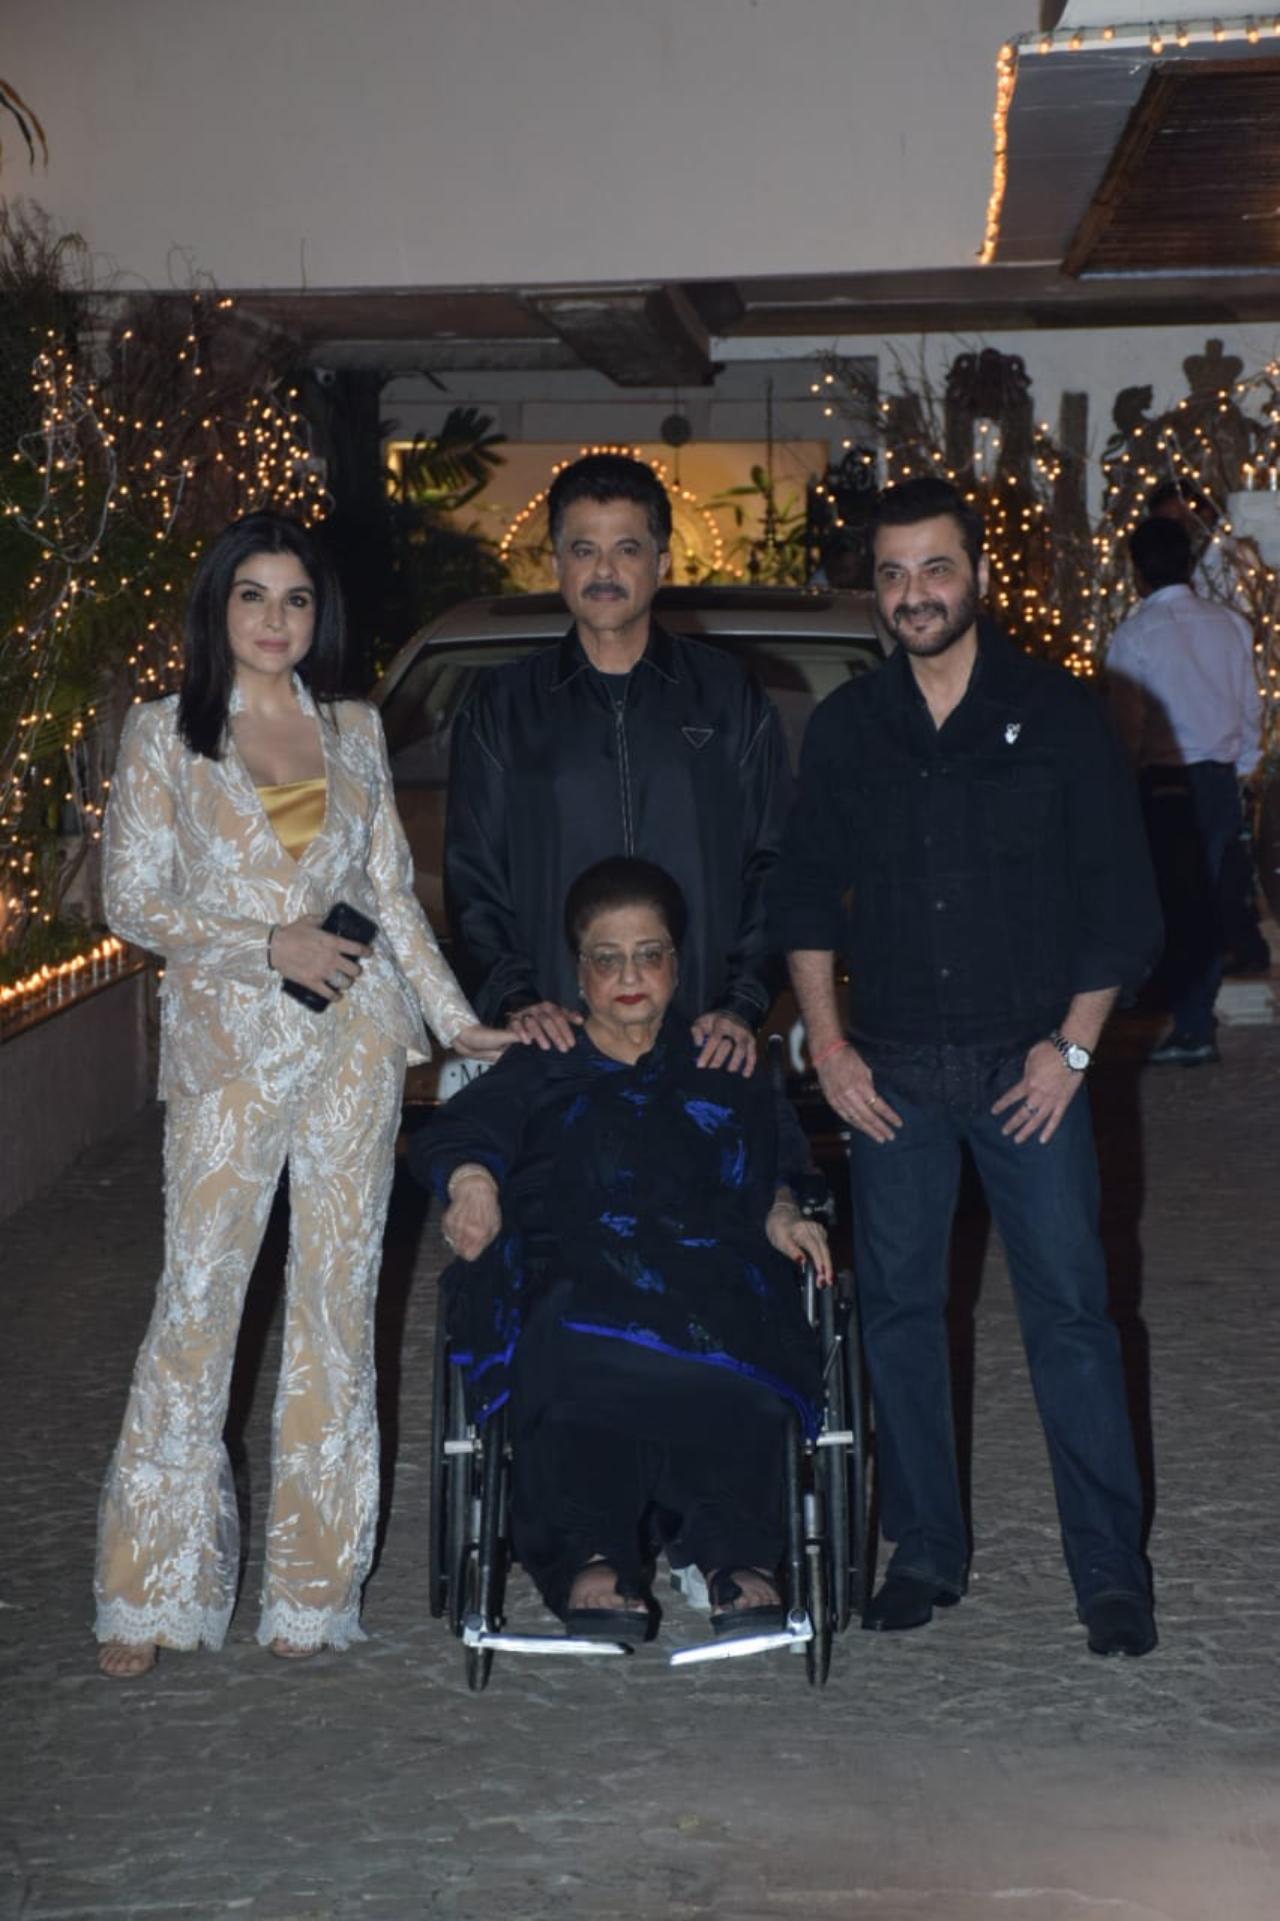 Actor Sanjay Kapoor arrived at the party along with his wife Maheep Kapoor. Sanjay opted for a black shirt and matching jeans. Maheep on the other hand looked beautiful in casual yellow coat pants with a matching deep-neck top. They also posed with Anil Kapoor and their mother for the paparazzi